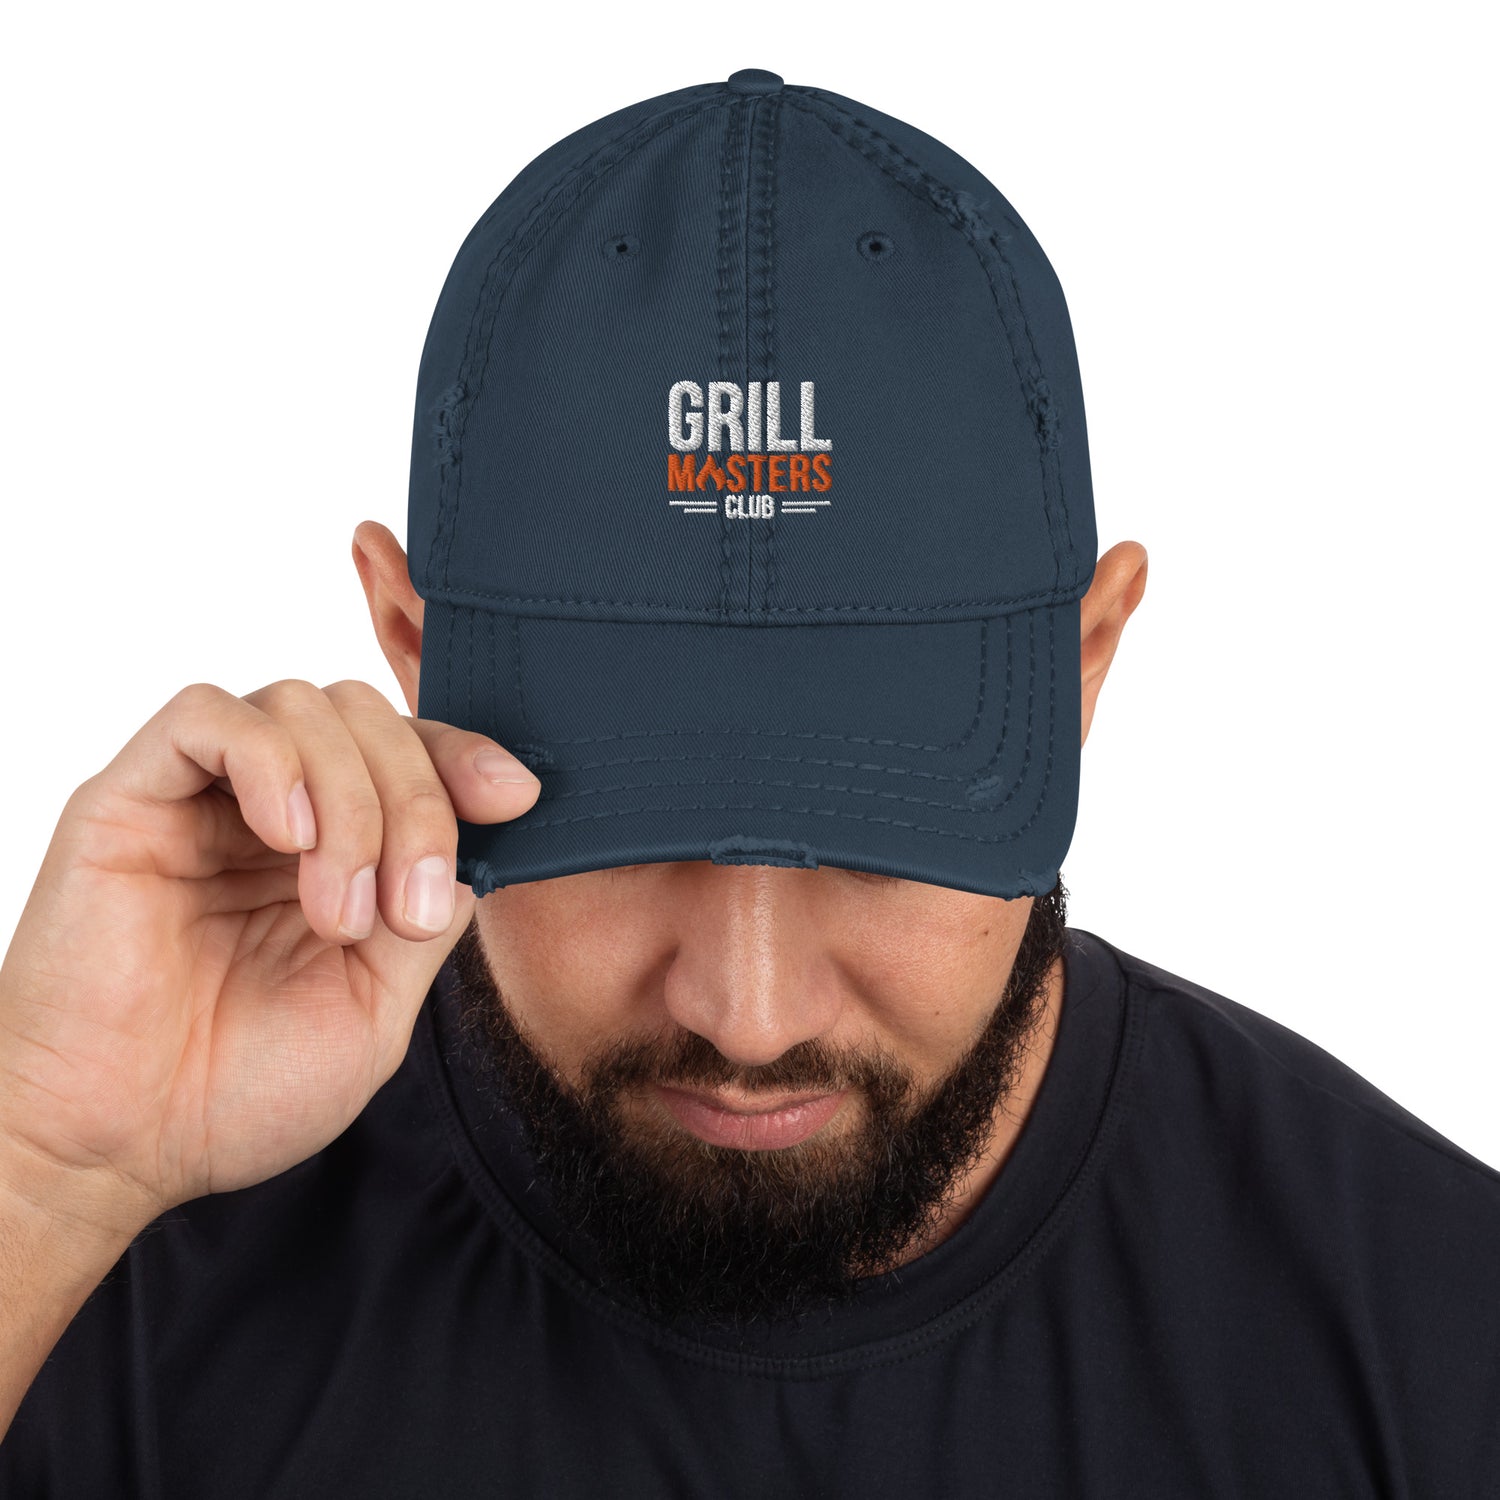 Grill Masters Club Distressed Dad Hat - White Logo (Free US Shipping)